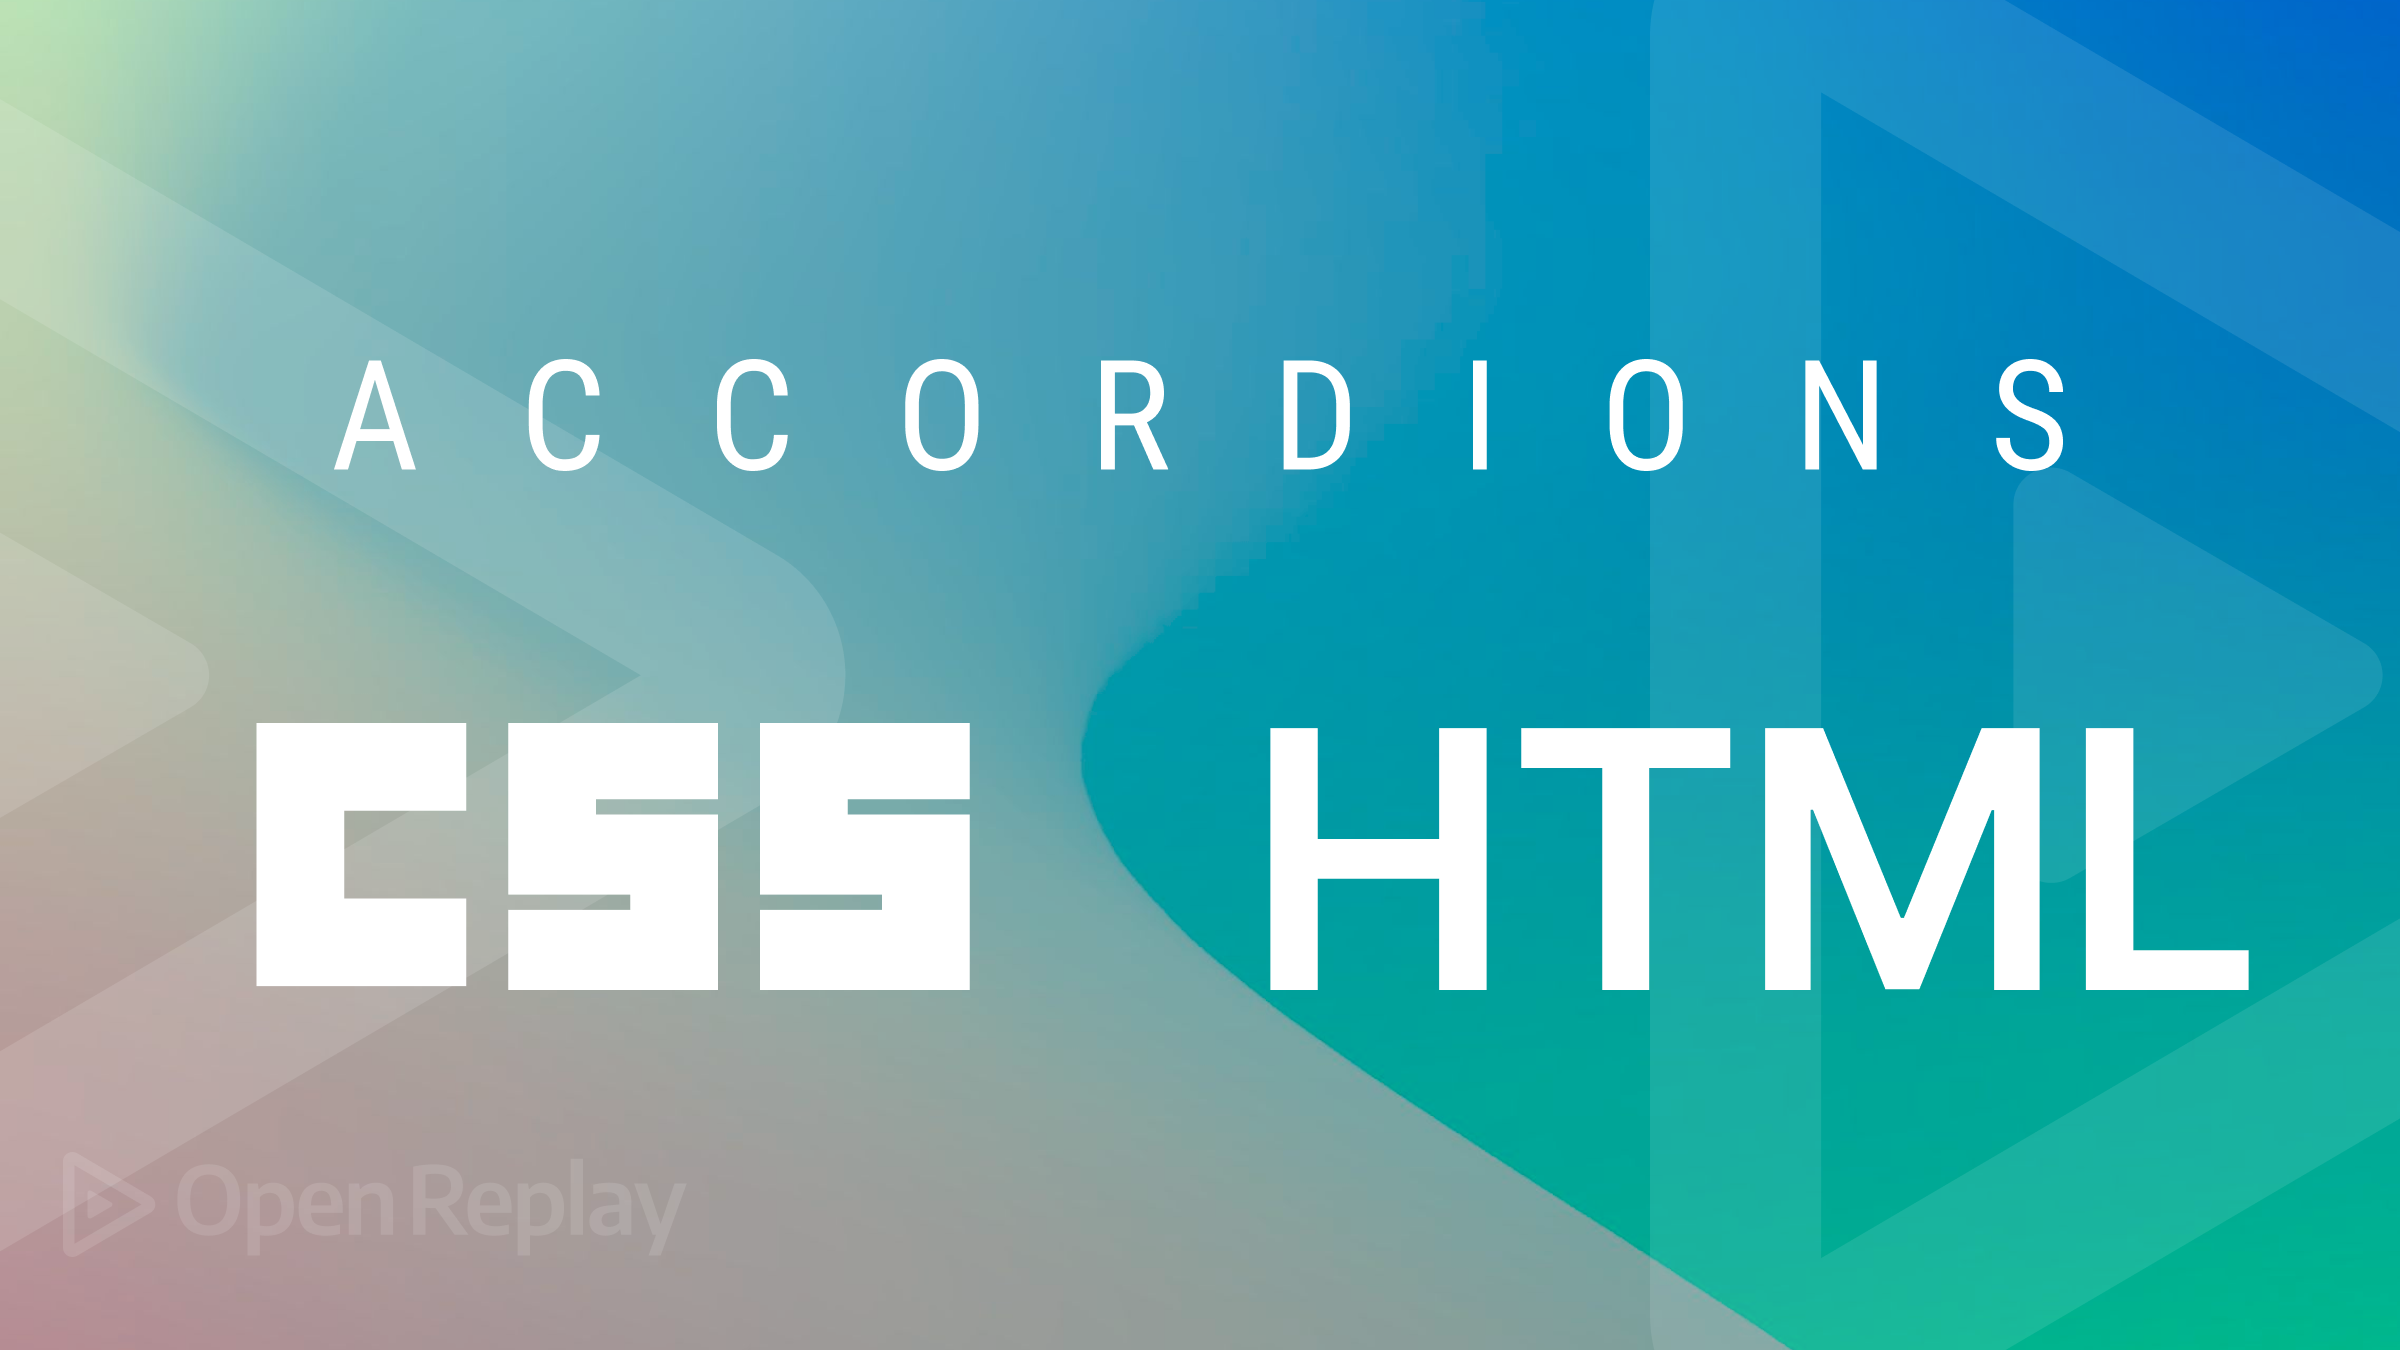 Creating Accordions with just HTML and CSS